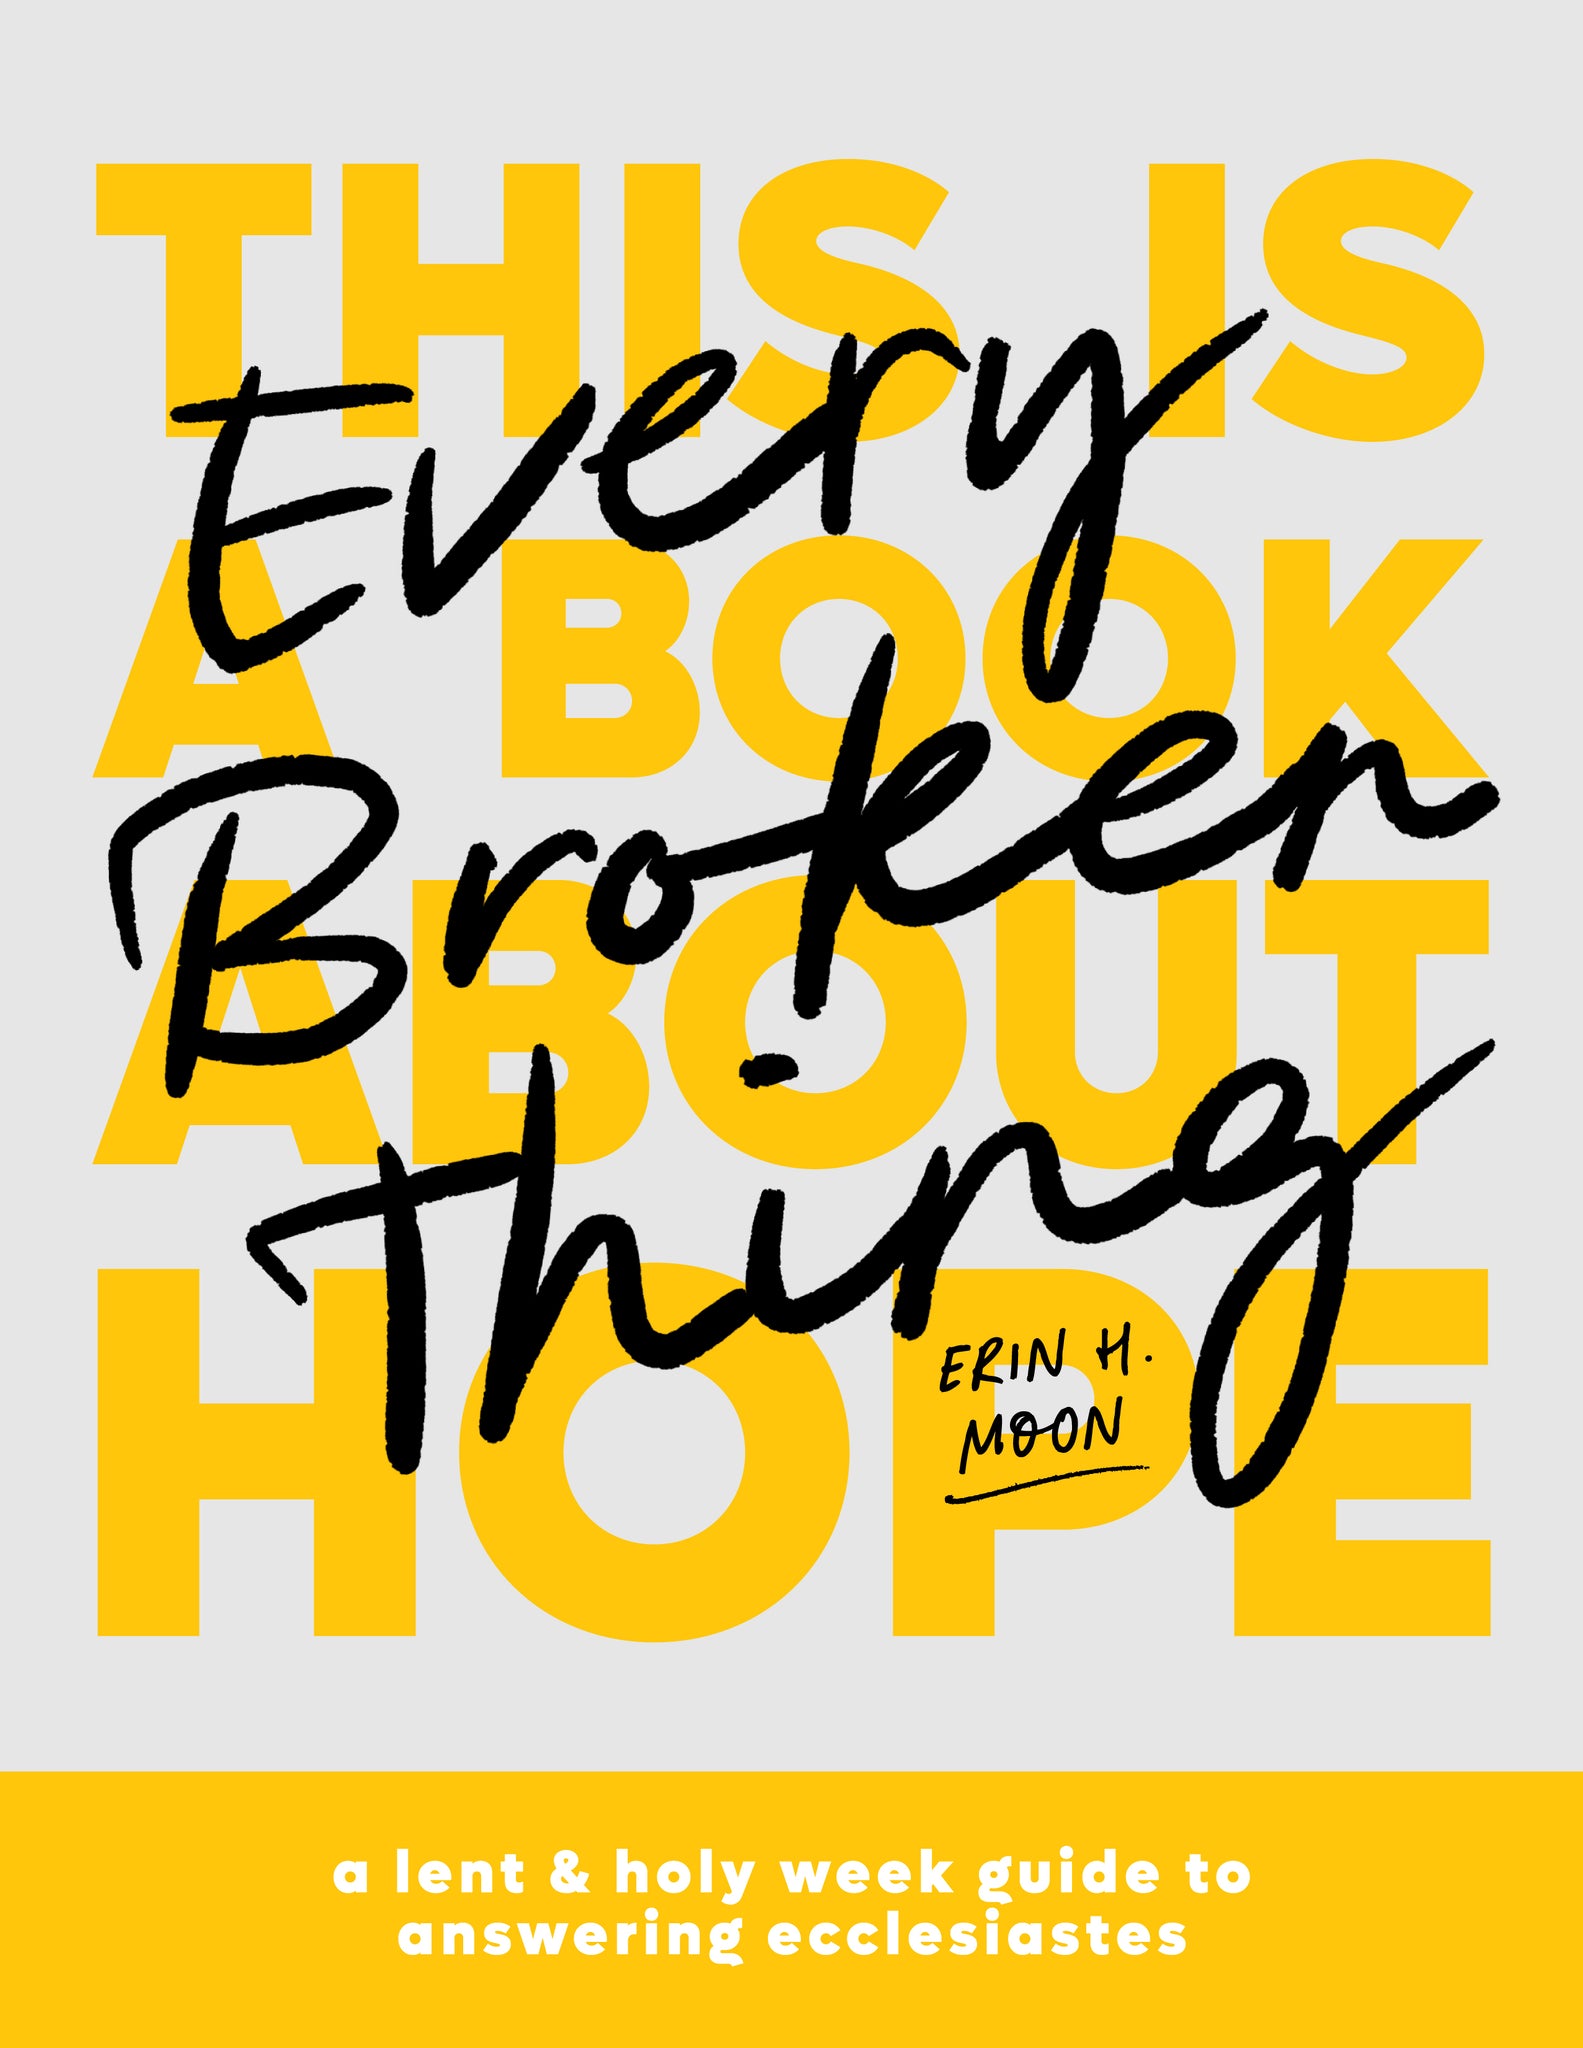 Every Broken Thing: A Lent & Holy Week Guide to Answering Ecclesiastes